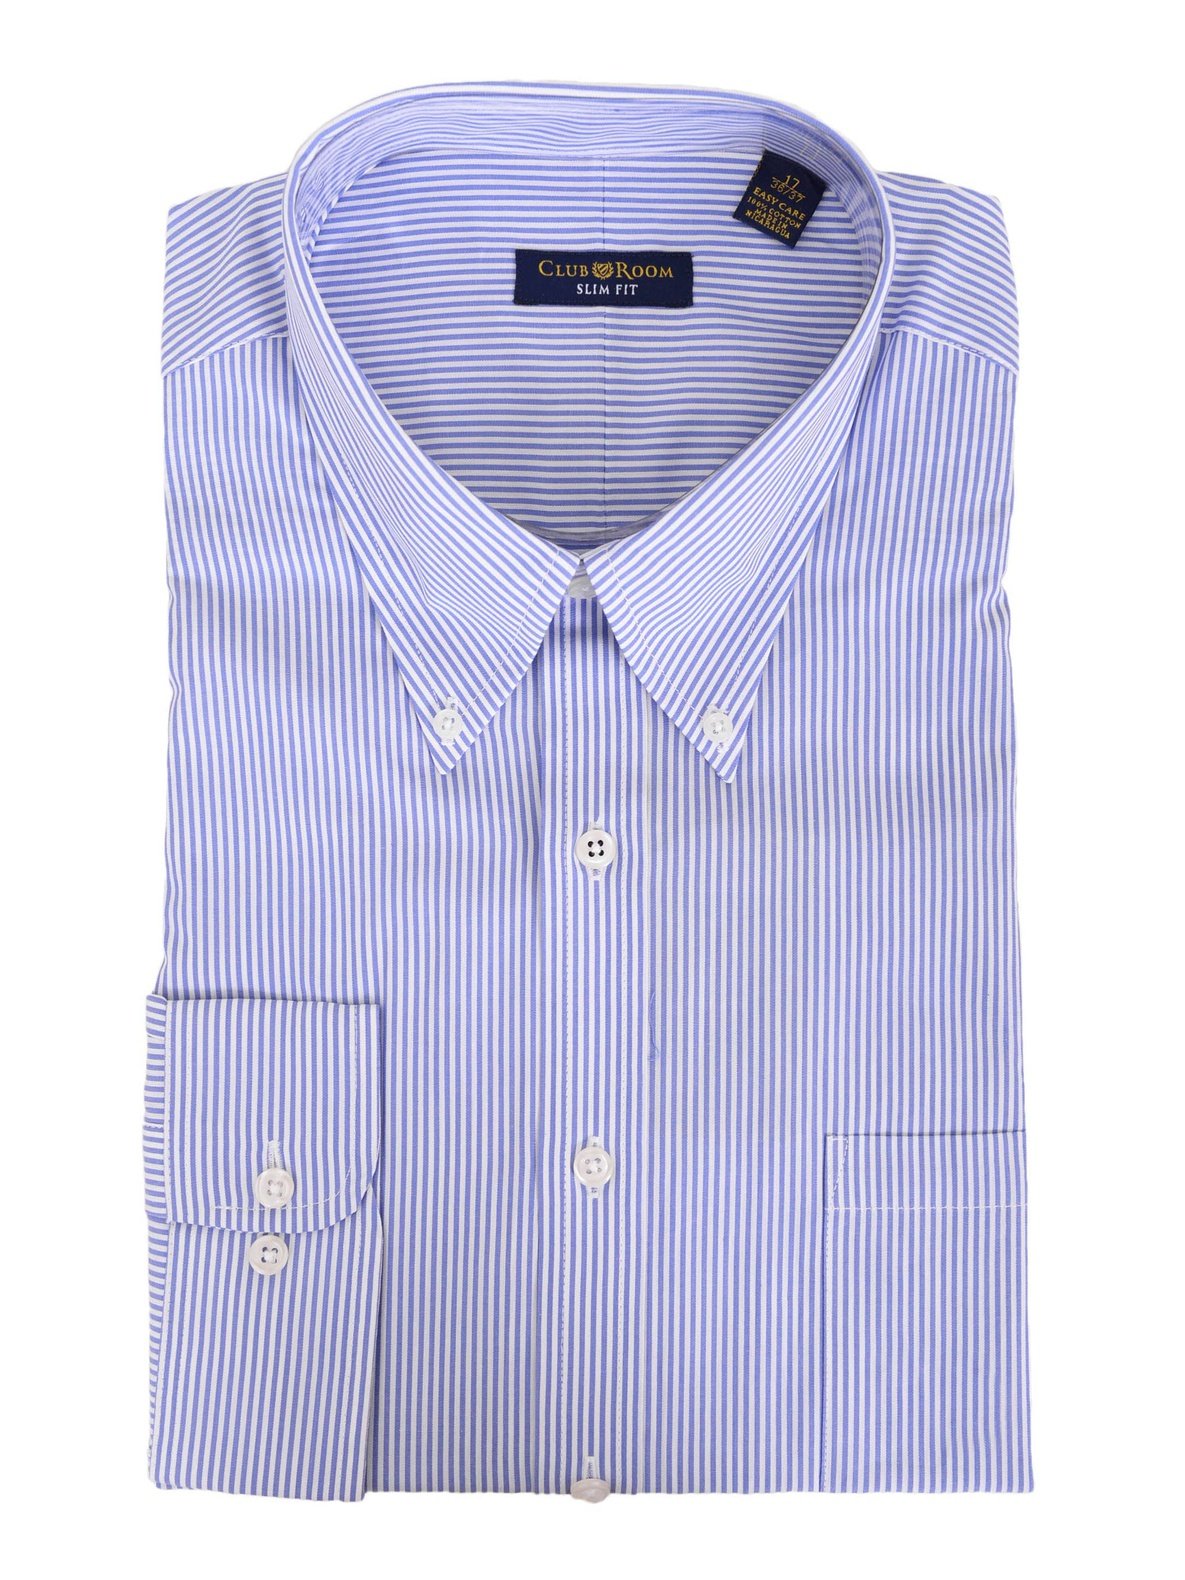 Striped oxford shirt with button-down collar - Striped shirts